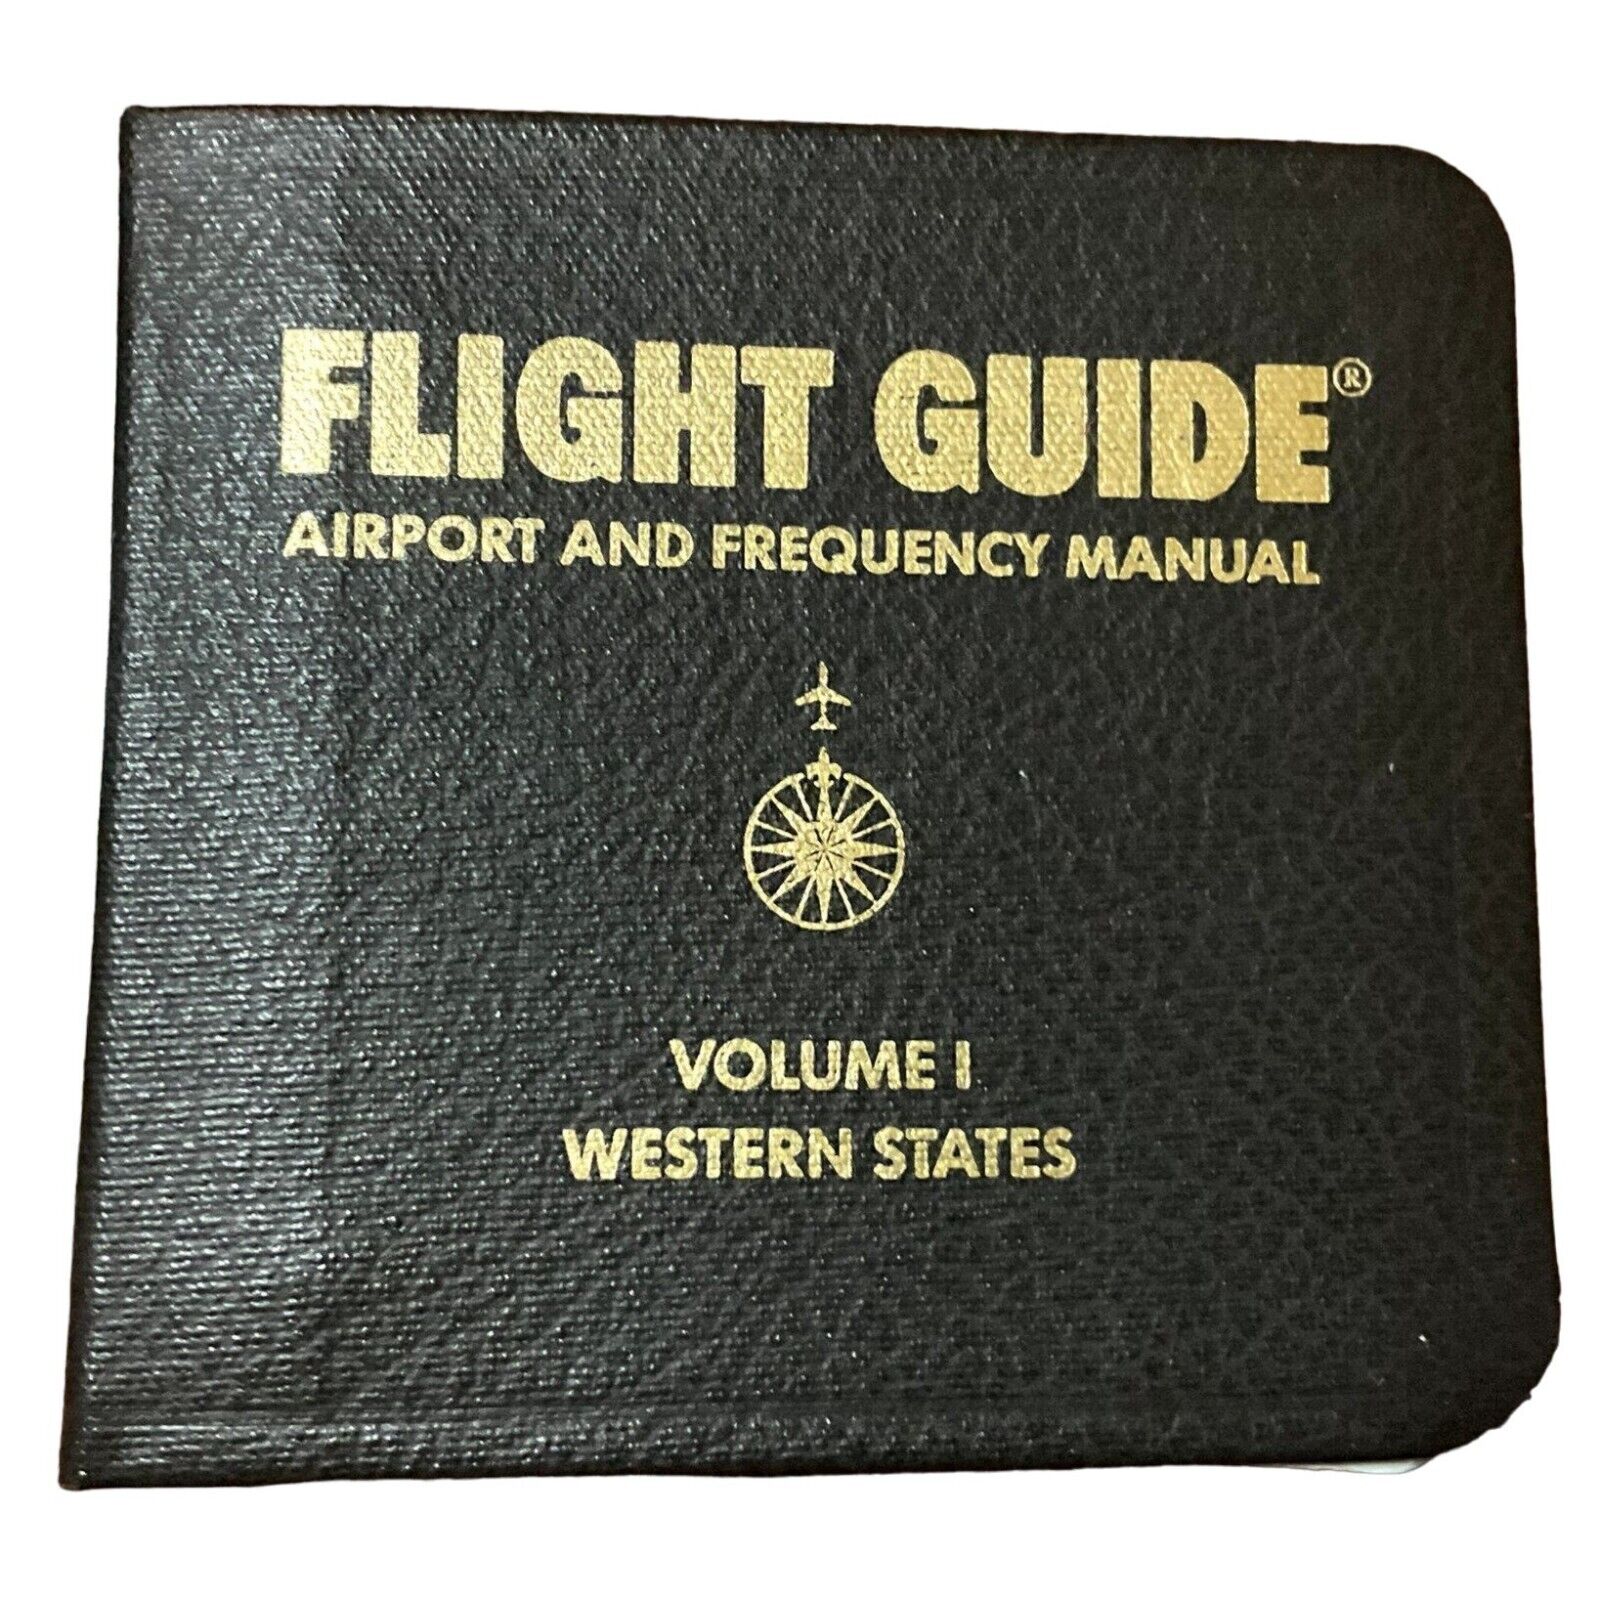 FLIGHT GUIDE AIRPORT AND FREQUENCY MANUAL 1986 VOLUME 1 WESTERN STATES